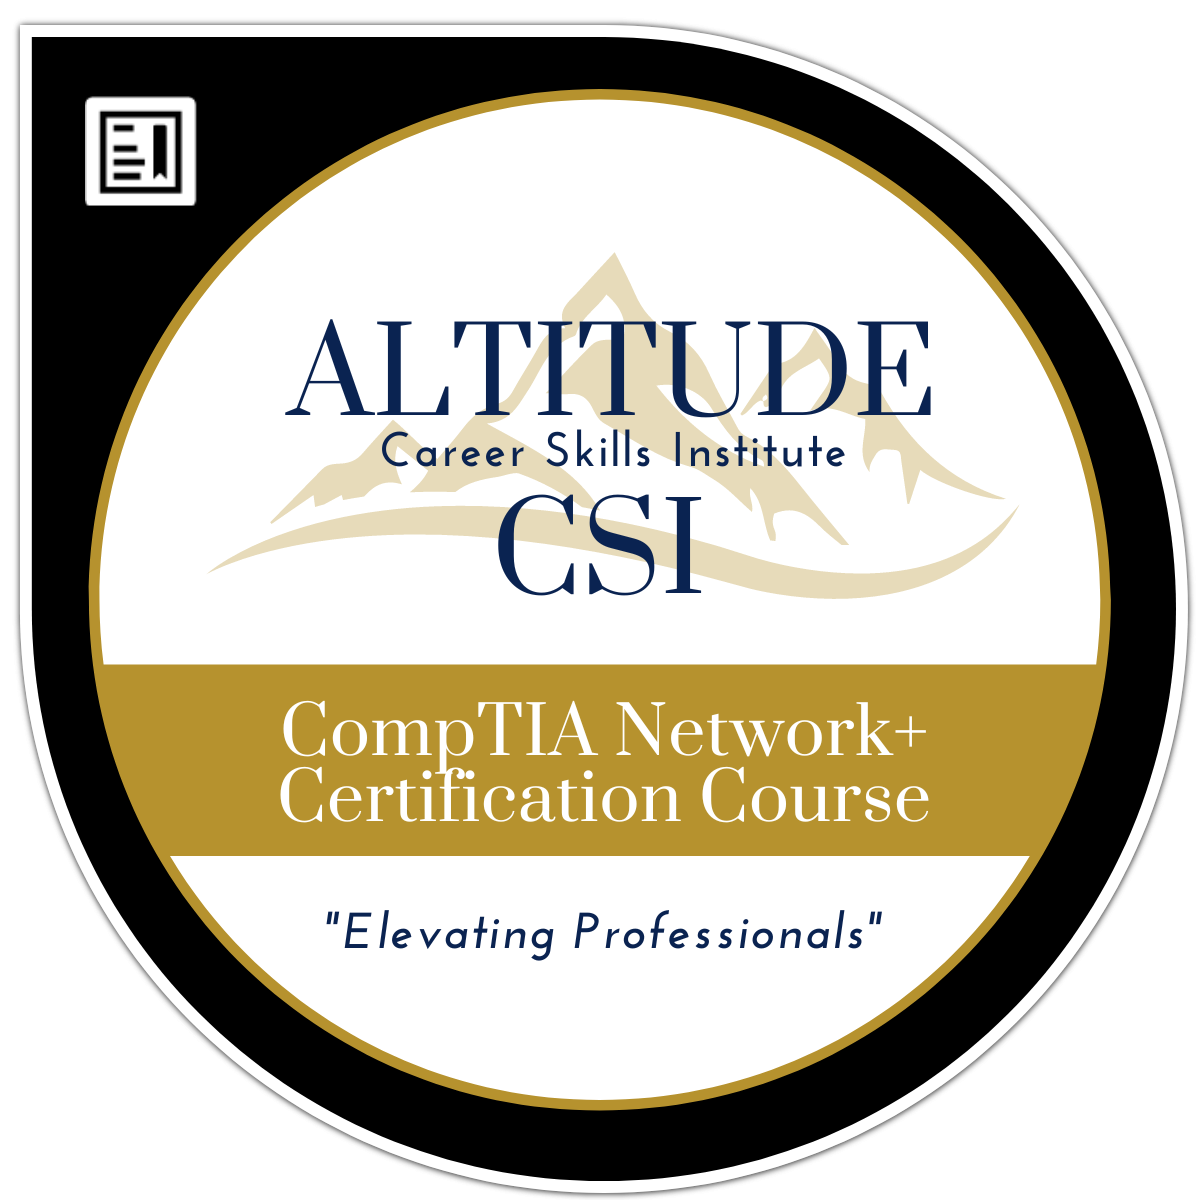 CompTIA Network+ Certification Course